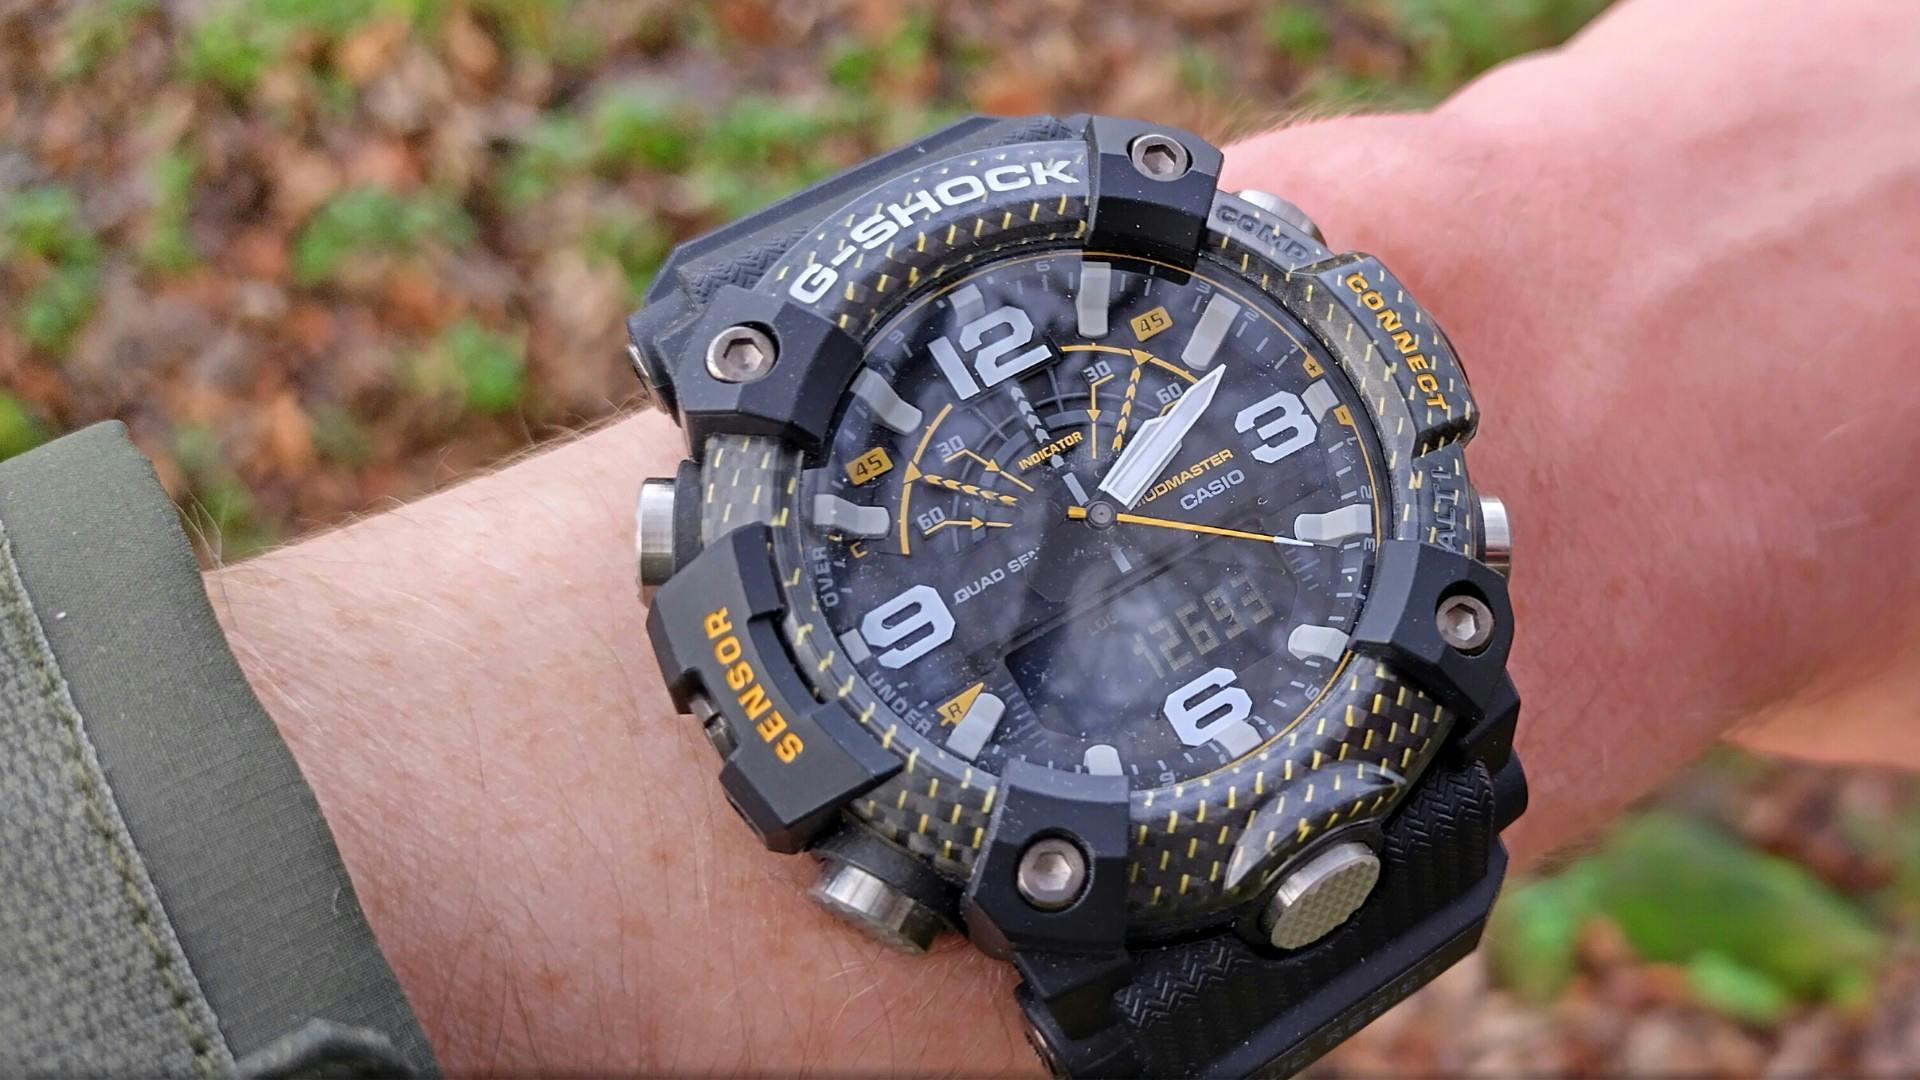 Casio G-Shock Mudmaster GG-B100 review live for the outdoors